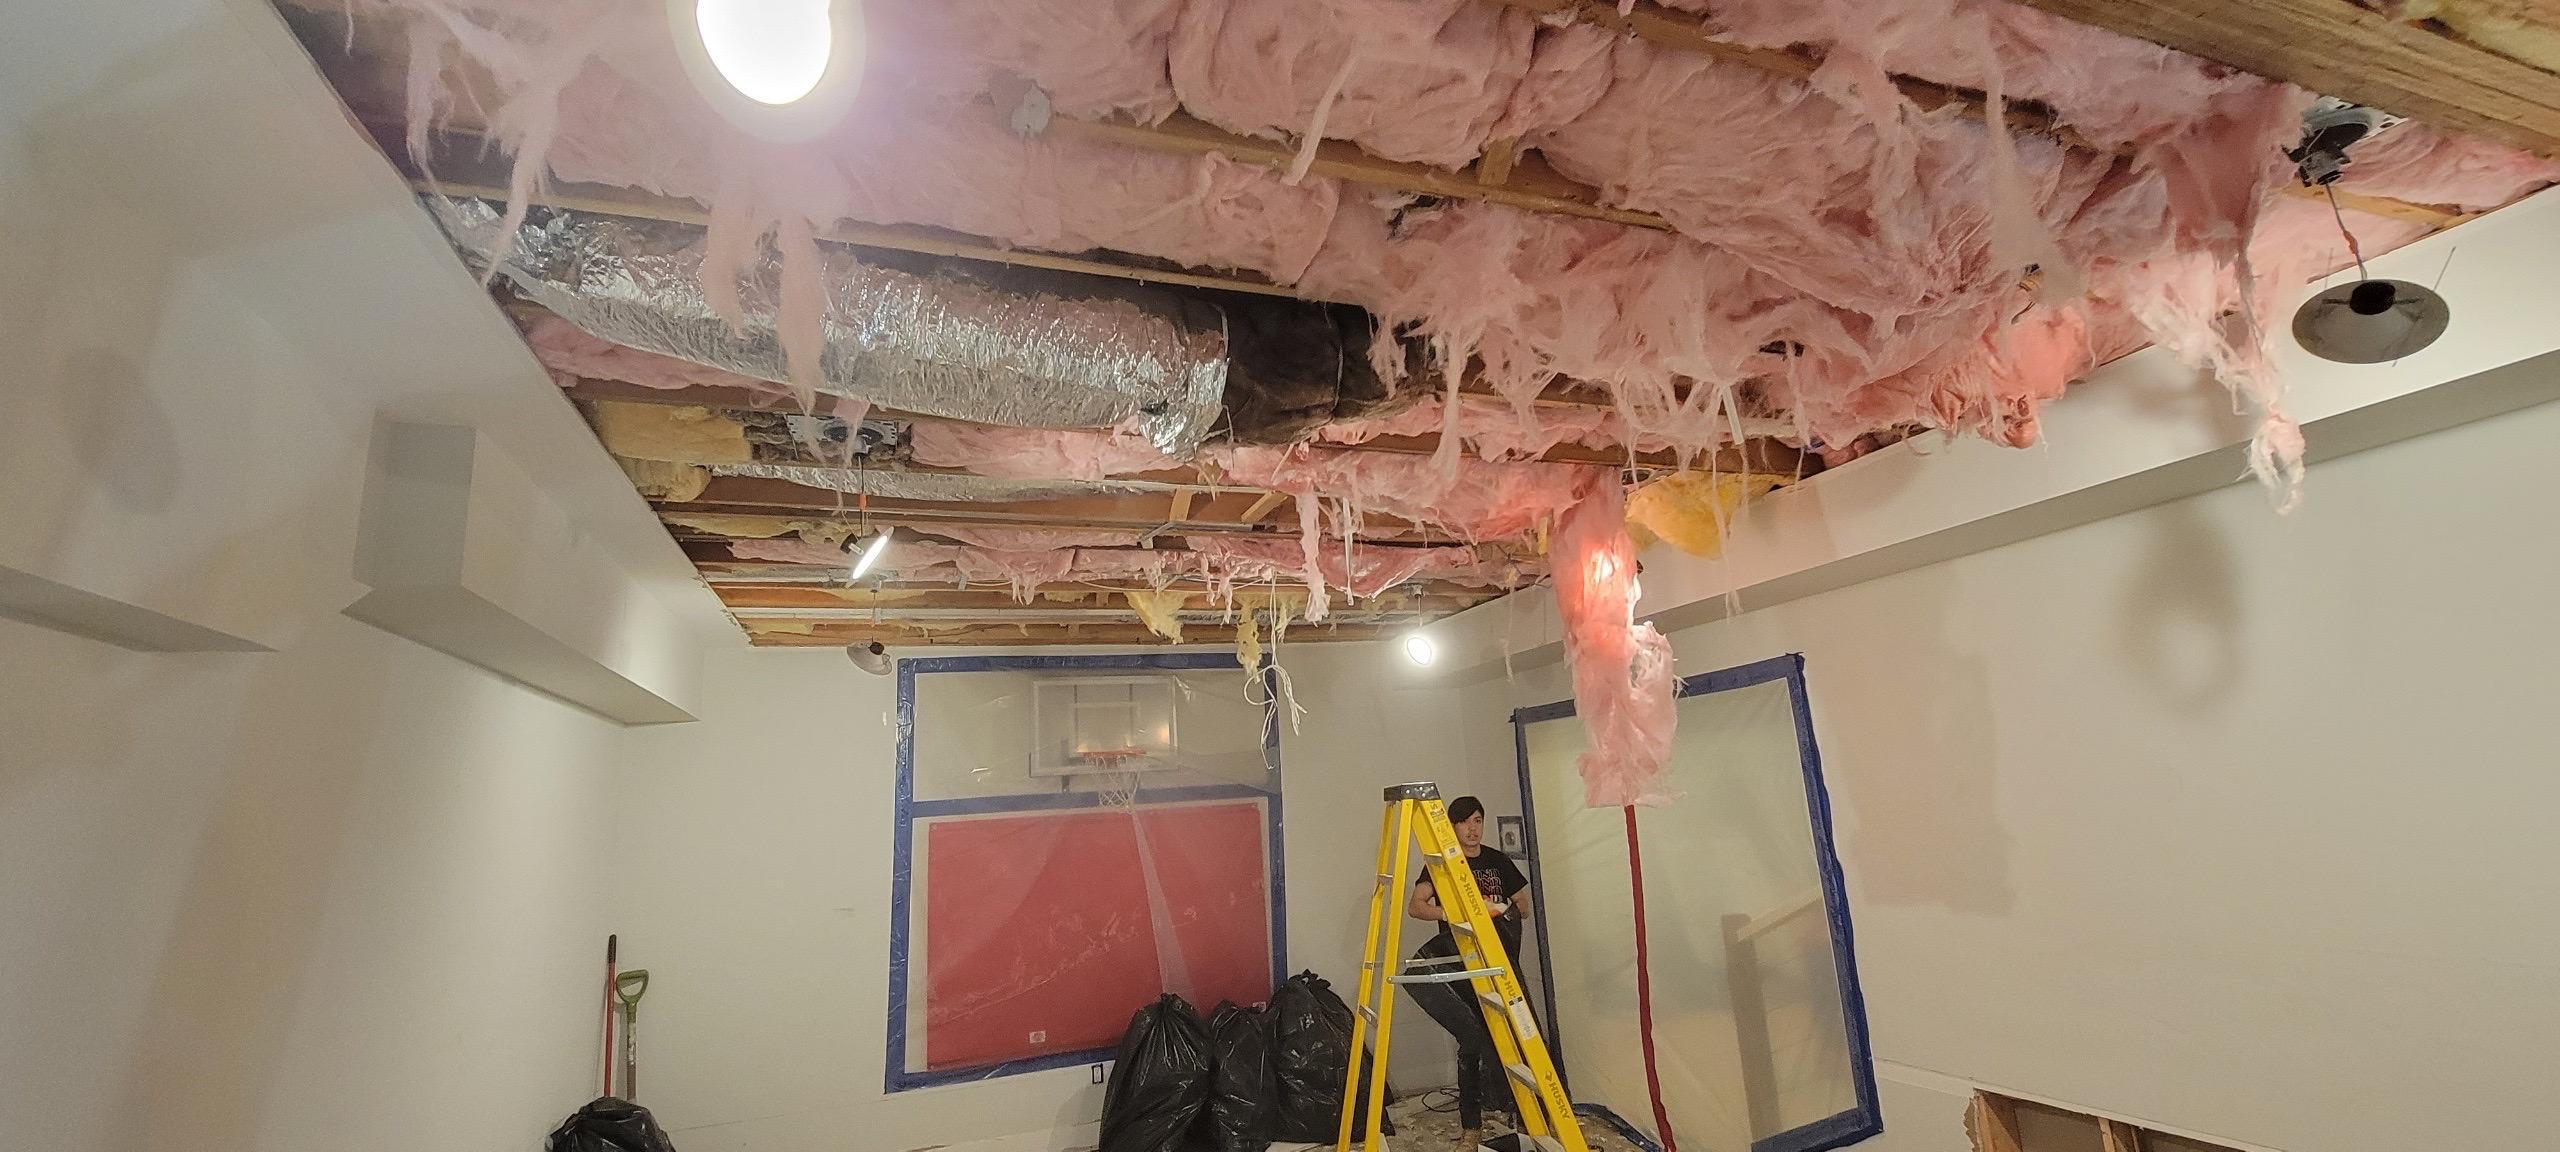 Indoor basketball court gets ruined by water damage in Scarsdale, NY